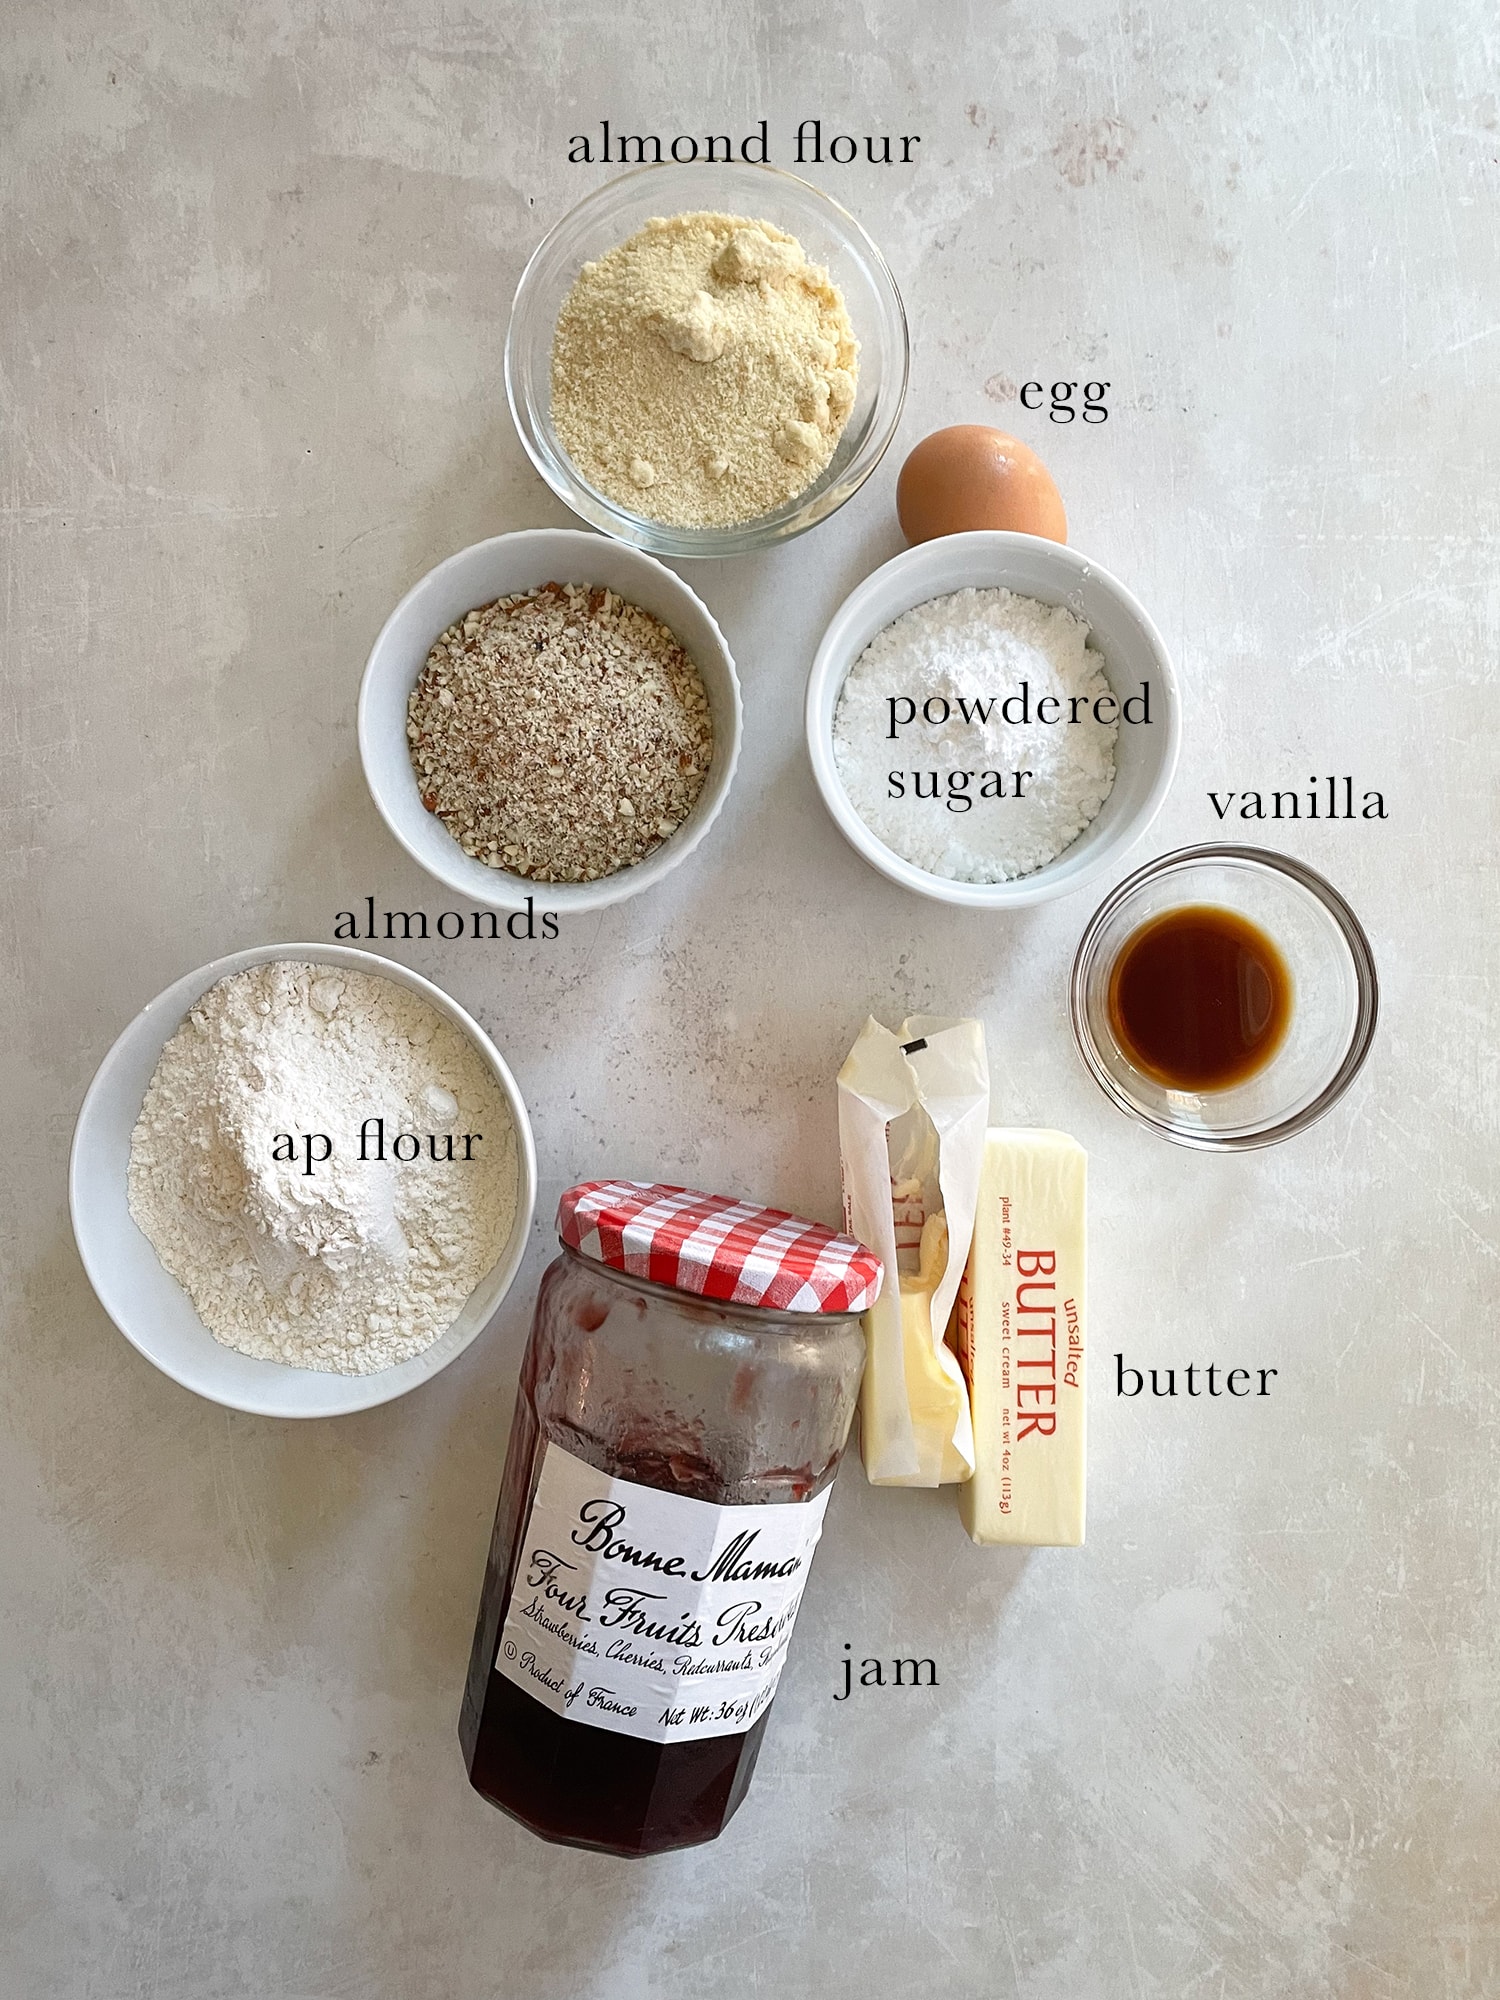 Ingredients laid out and labeled for a linzer torte.